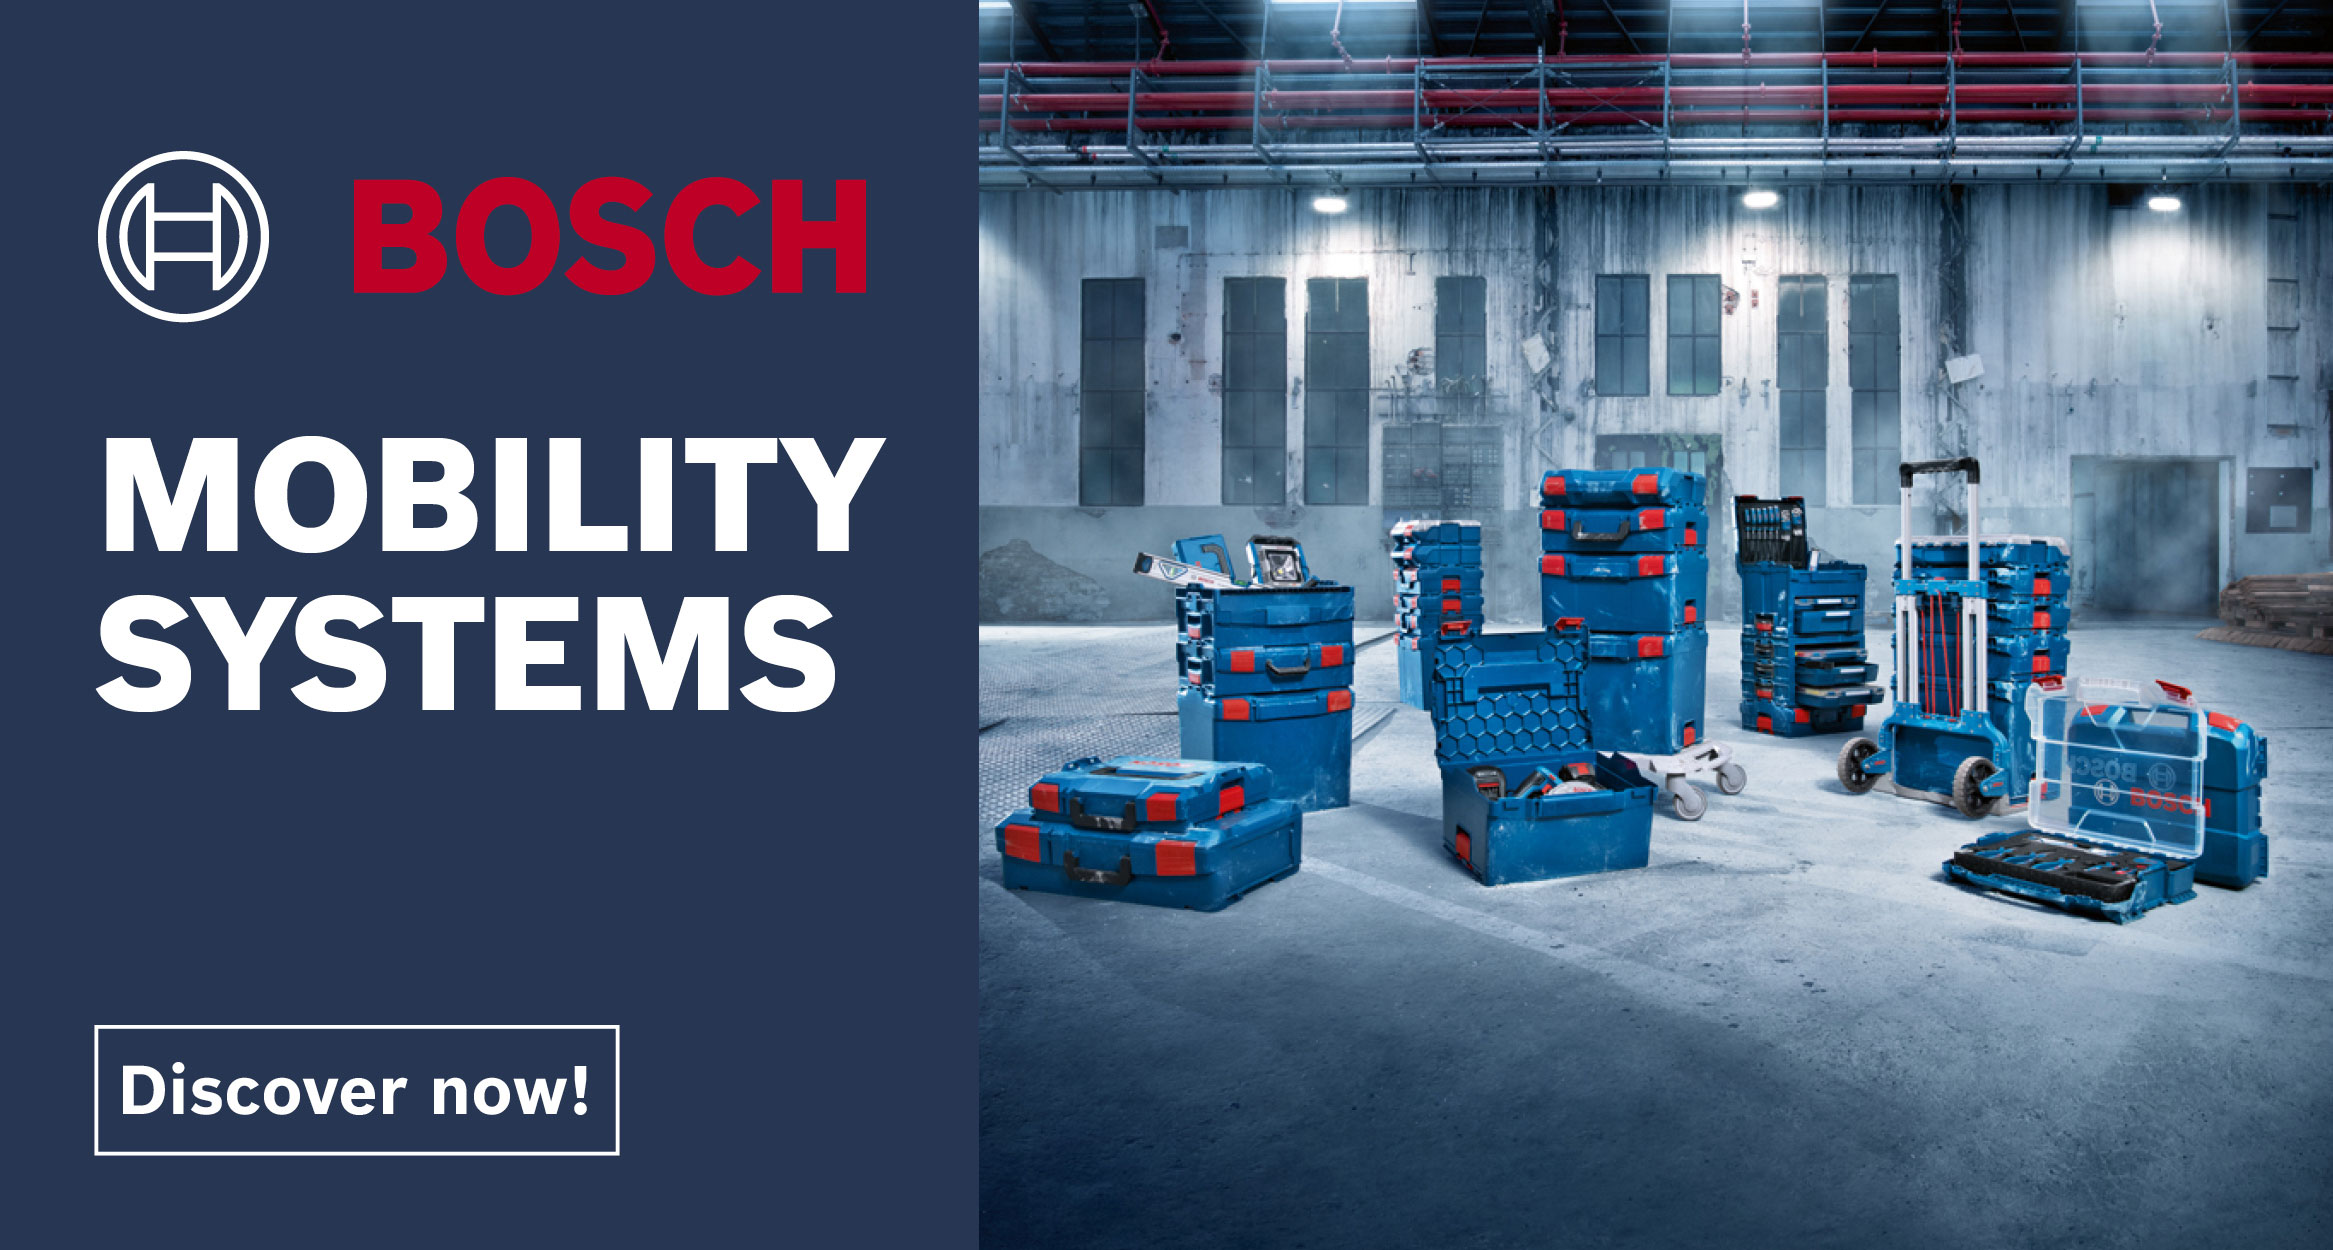 Bosch Mobility Systems